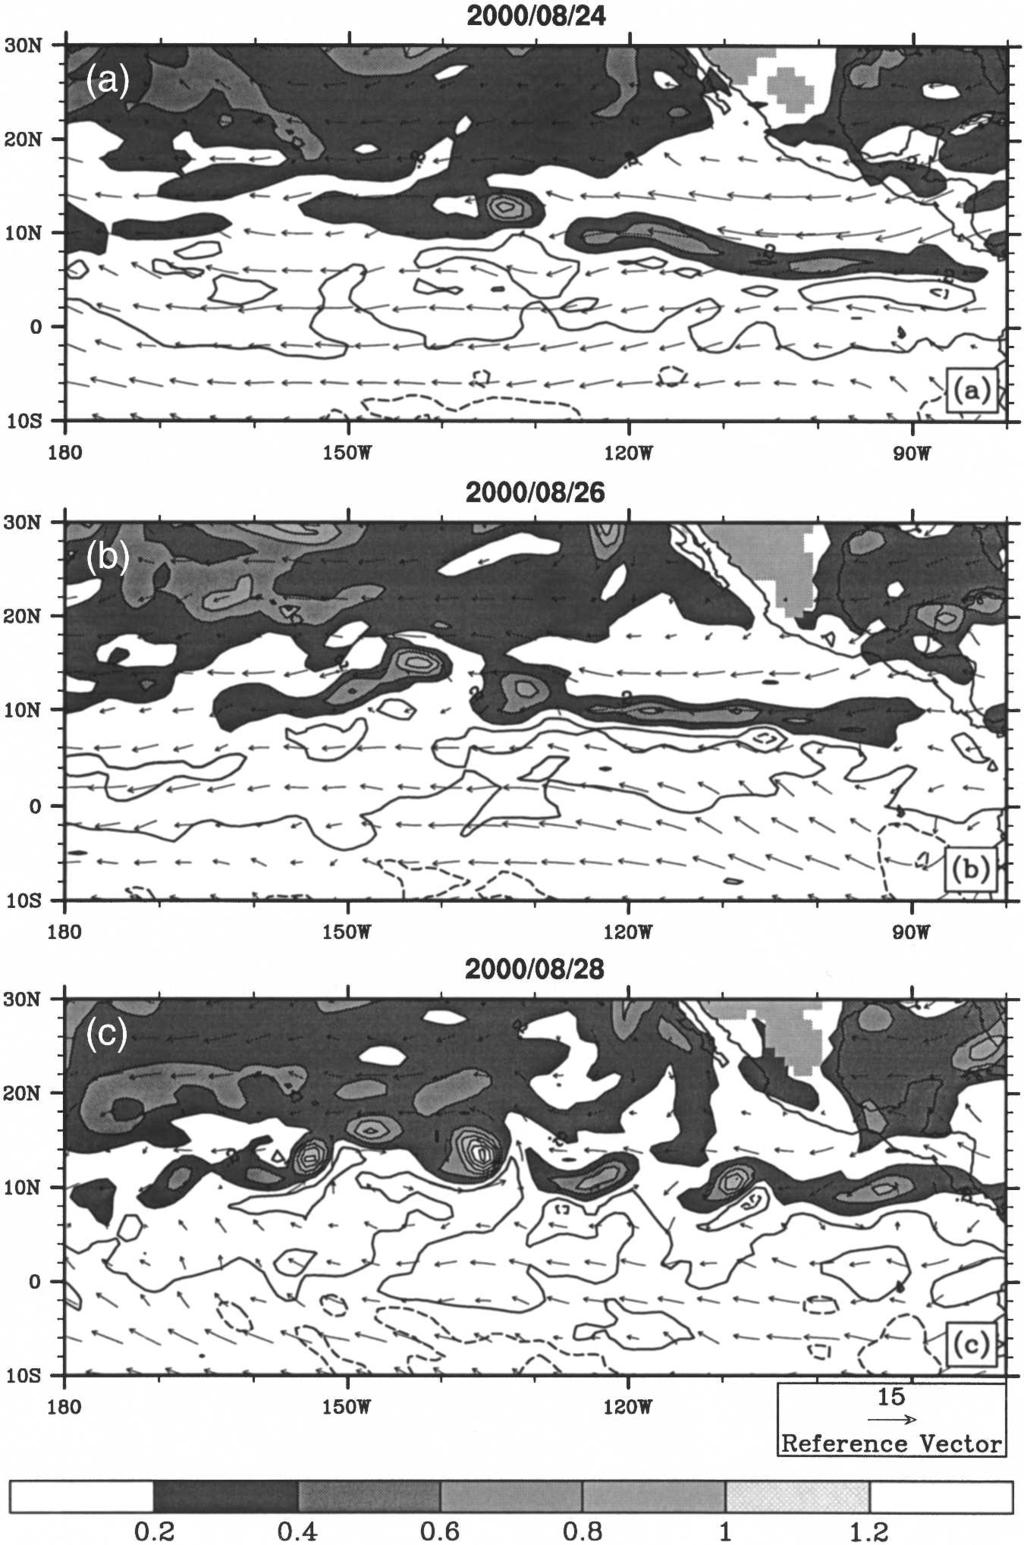 MAY 2005 W A N G A N D M A G N U S D O T T I R 1507 FIG. 10. A case of ITCZ breakdown observed at the end of Aug 2000. (a) An elongated PV strip is located in the tropical east Pacific on 24 Aug.